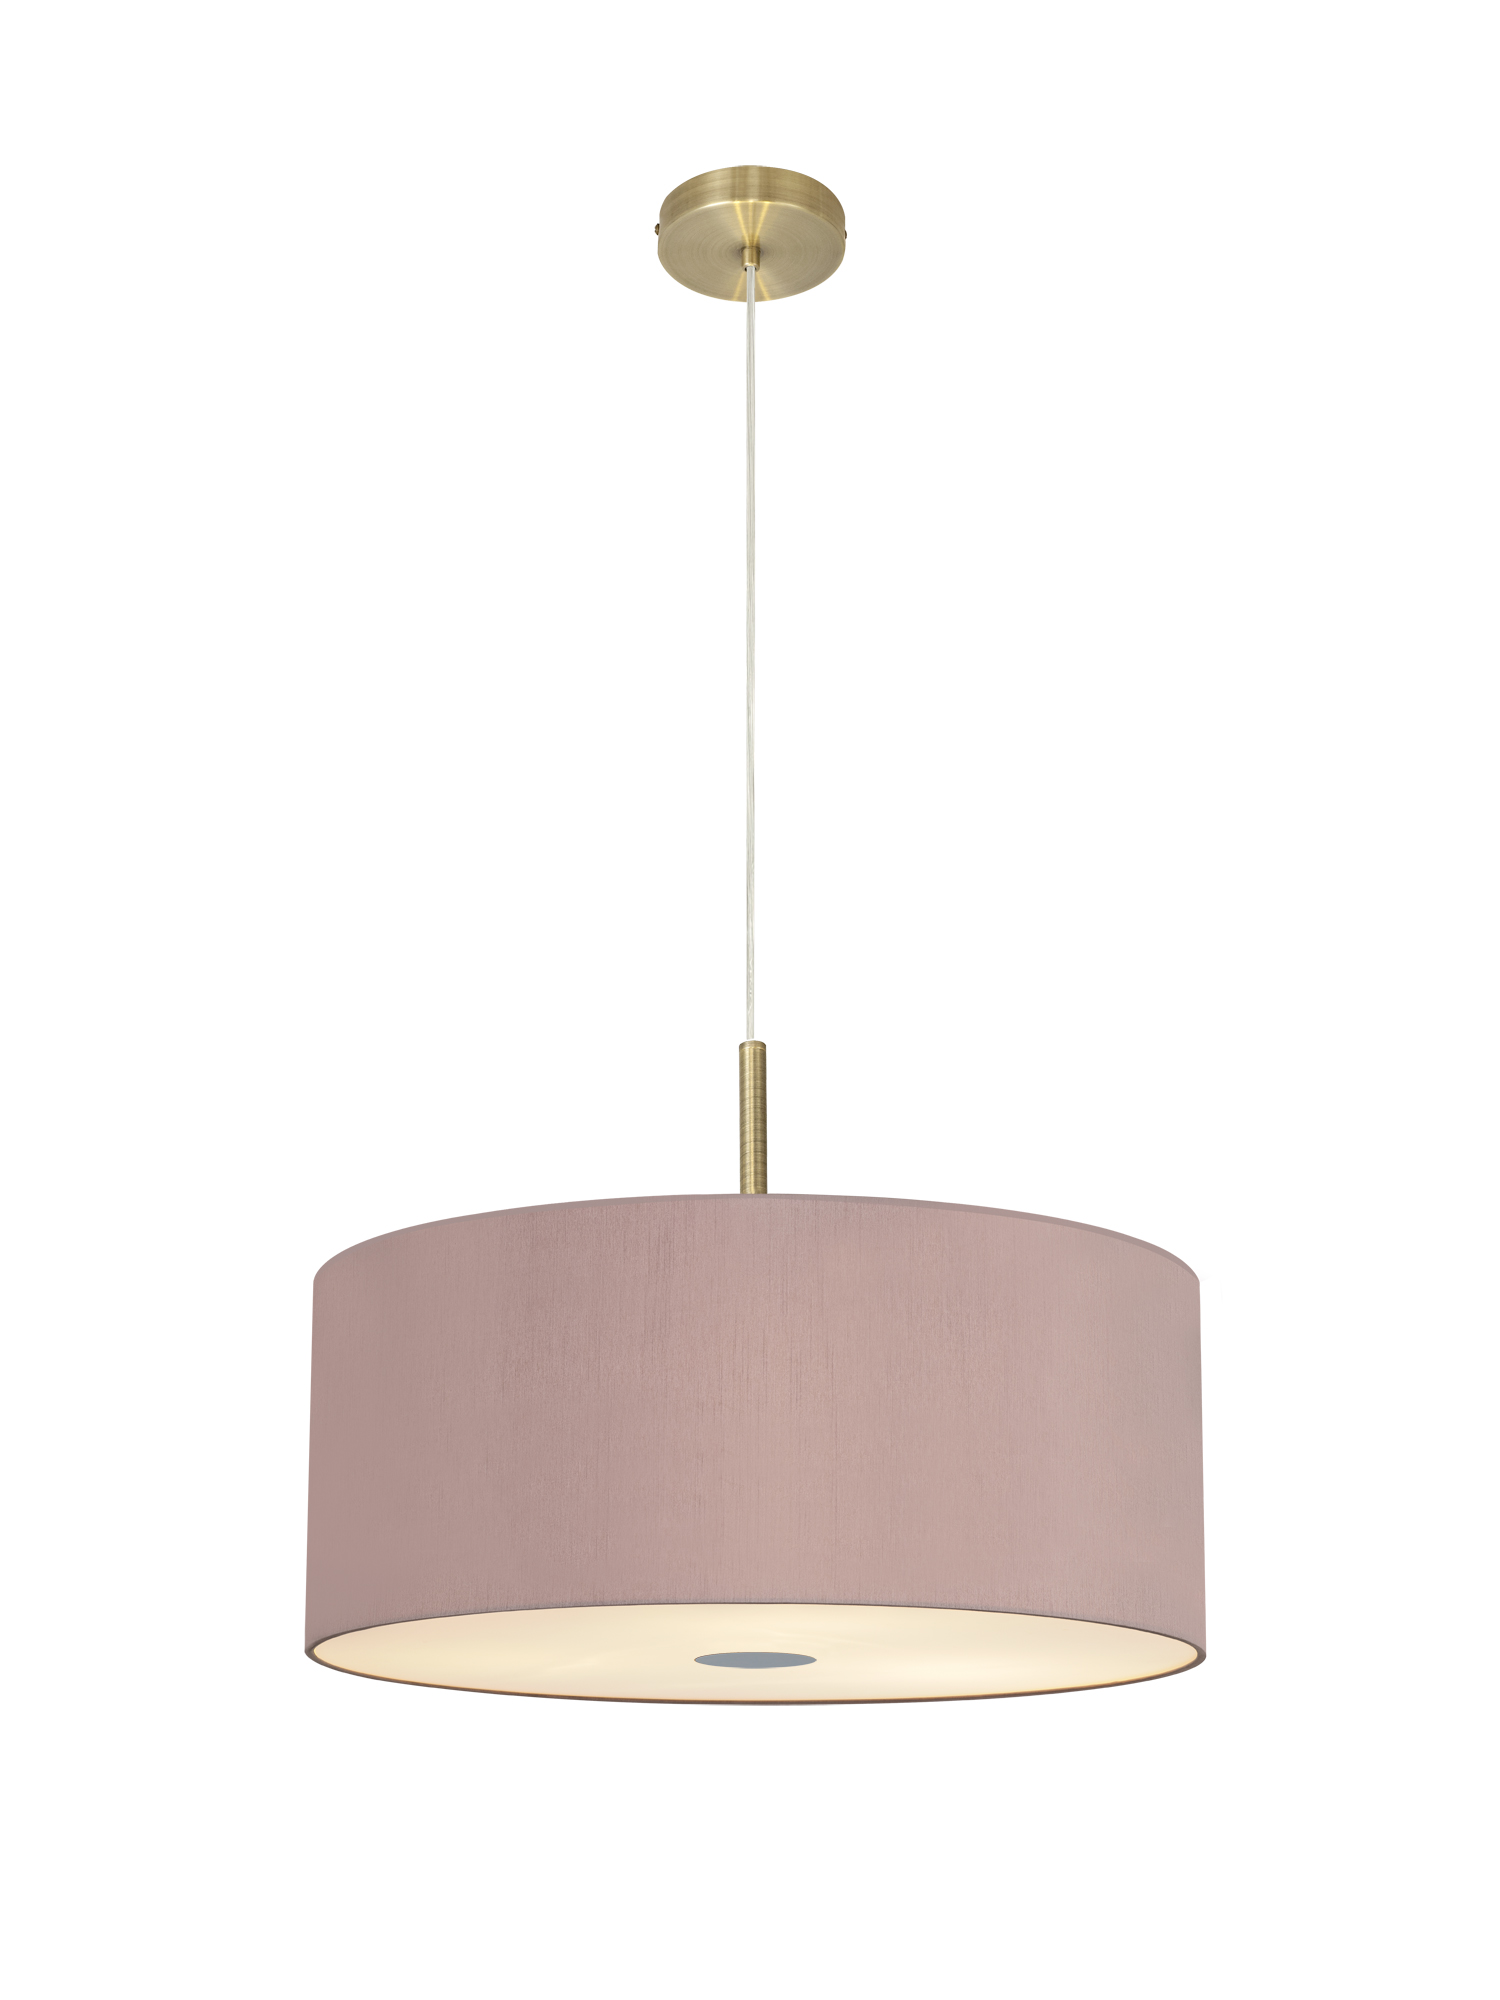 Baymont 60cm 5 Light Pendant Antique Brass; Taupe/Halo Gold; Frosted Diffuser DK0519  Deco Baymont AB TA